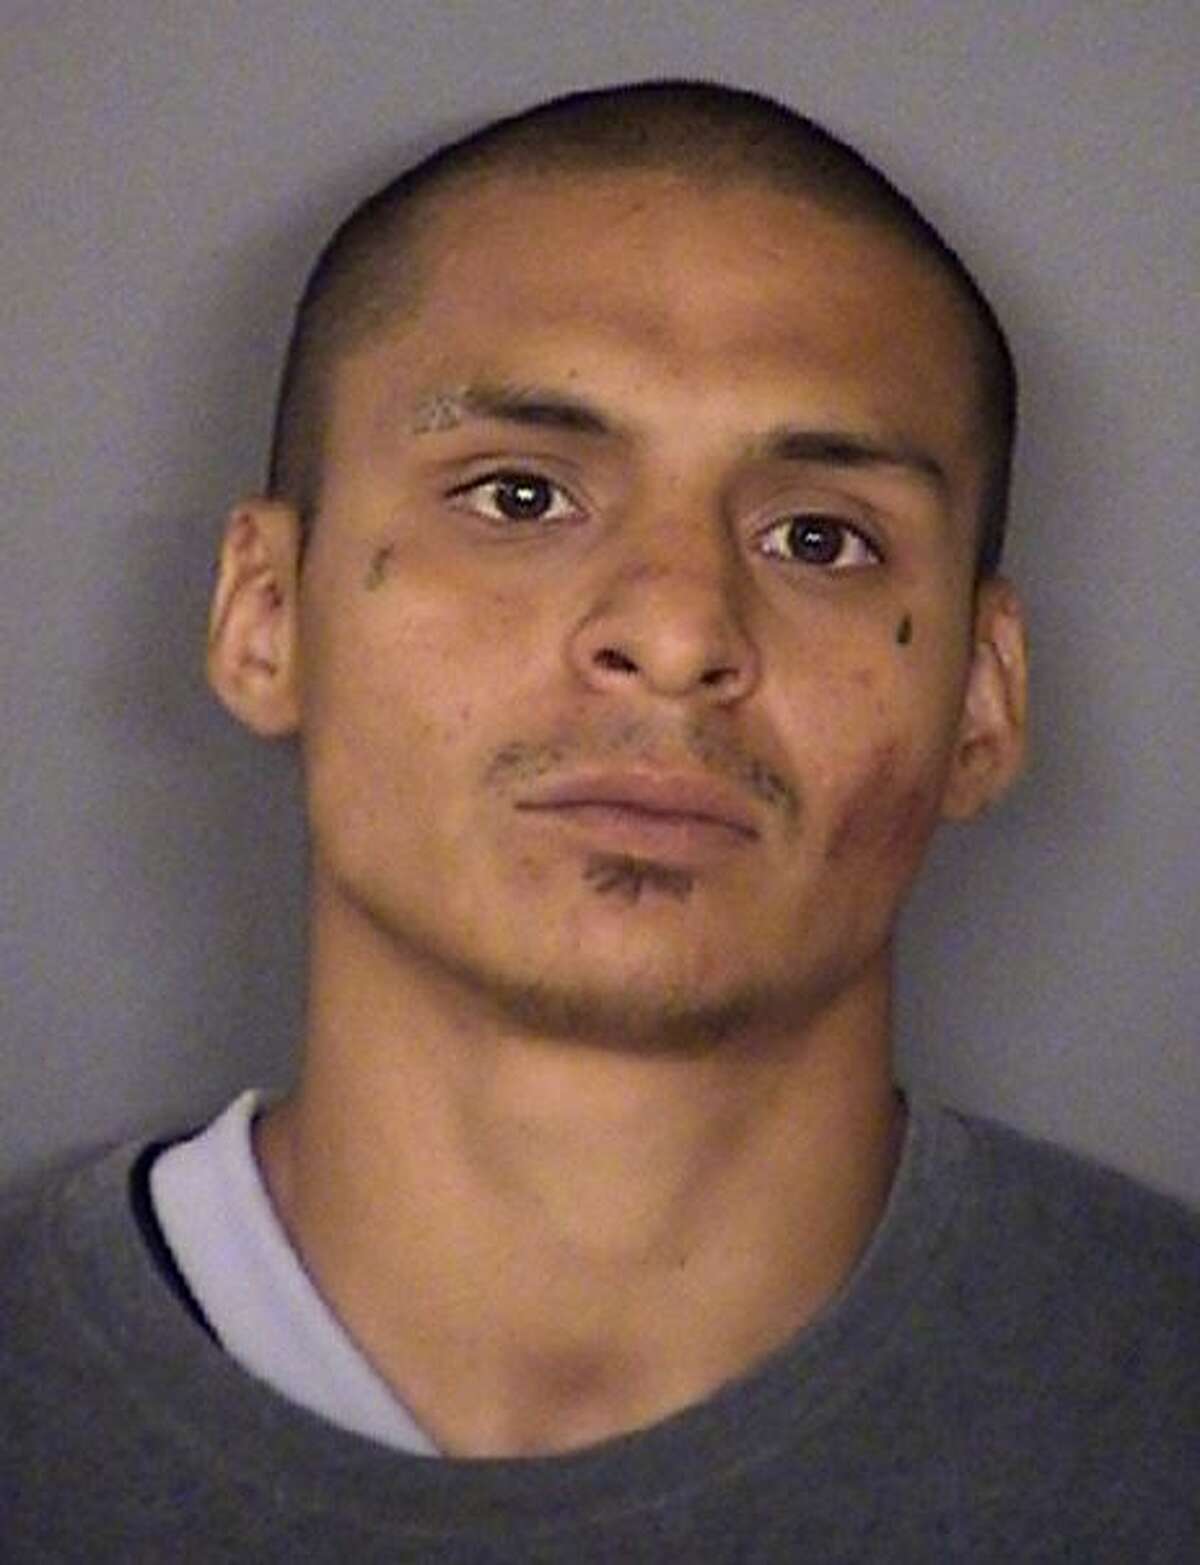 Case: Homicide victim Robert Reyes Jr.Date: June 10, 2017 Summary: Robert Reyes Jr., 24, was gunned down around 6:35 p.m. on Saturday, June 10, in the 8200 block of South Flores Street at the River Bend Apartments. He was last seen approaching a white pickup shortly before his death.